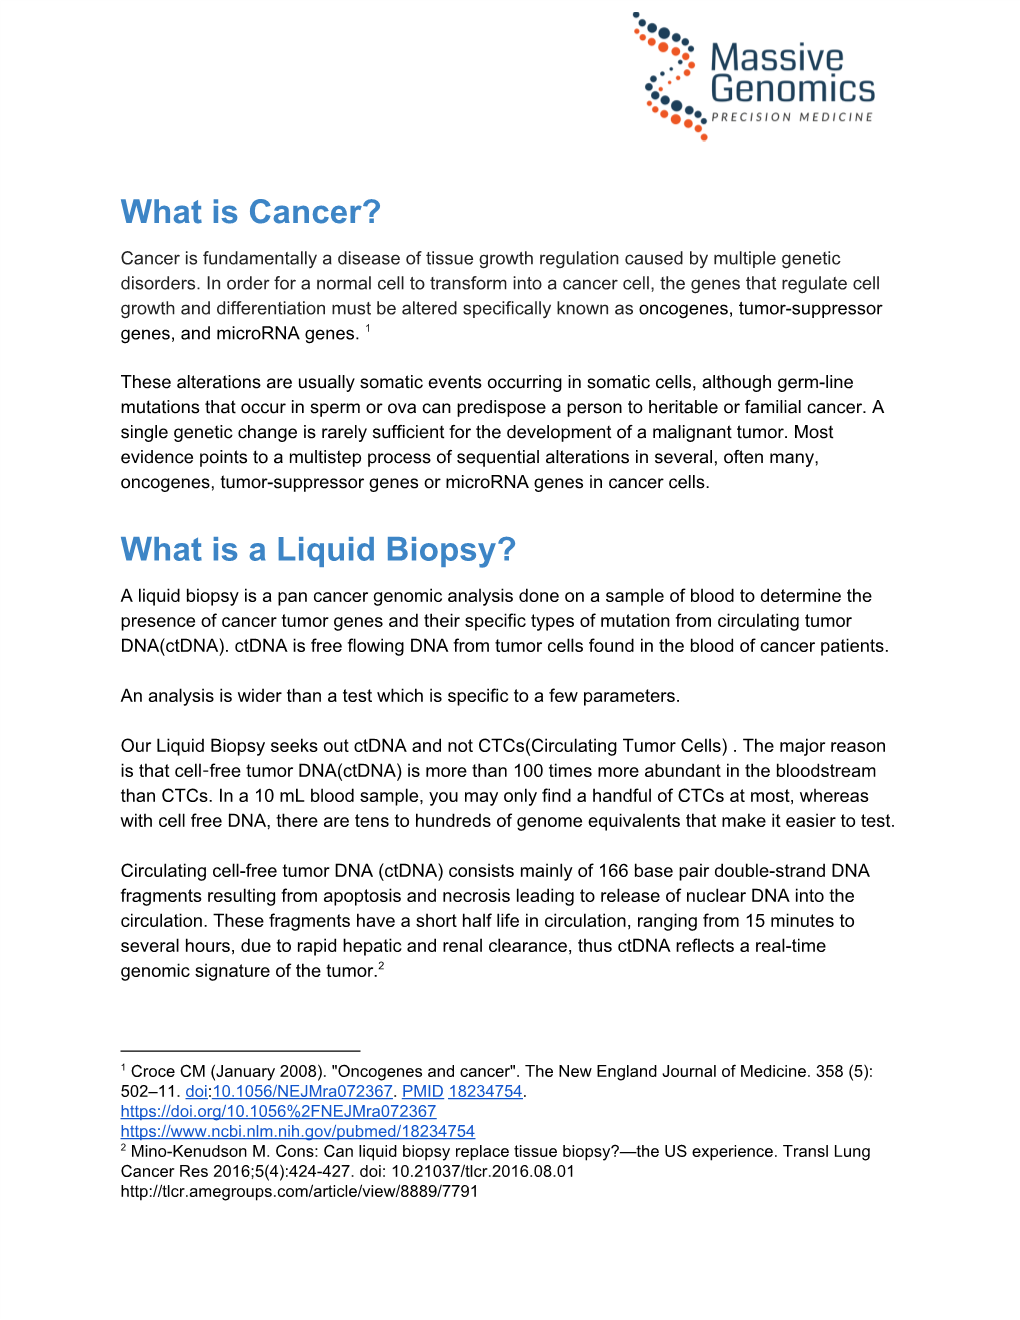 What Is Cancer? What Is a Liquid Biopsy?